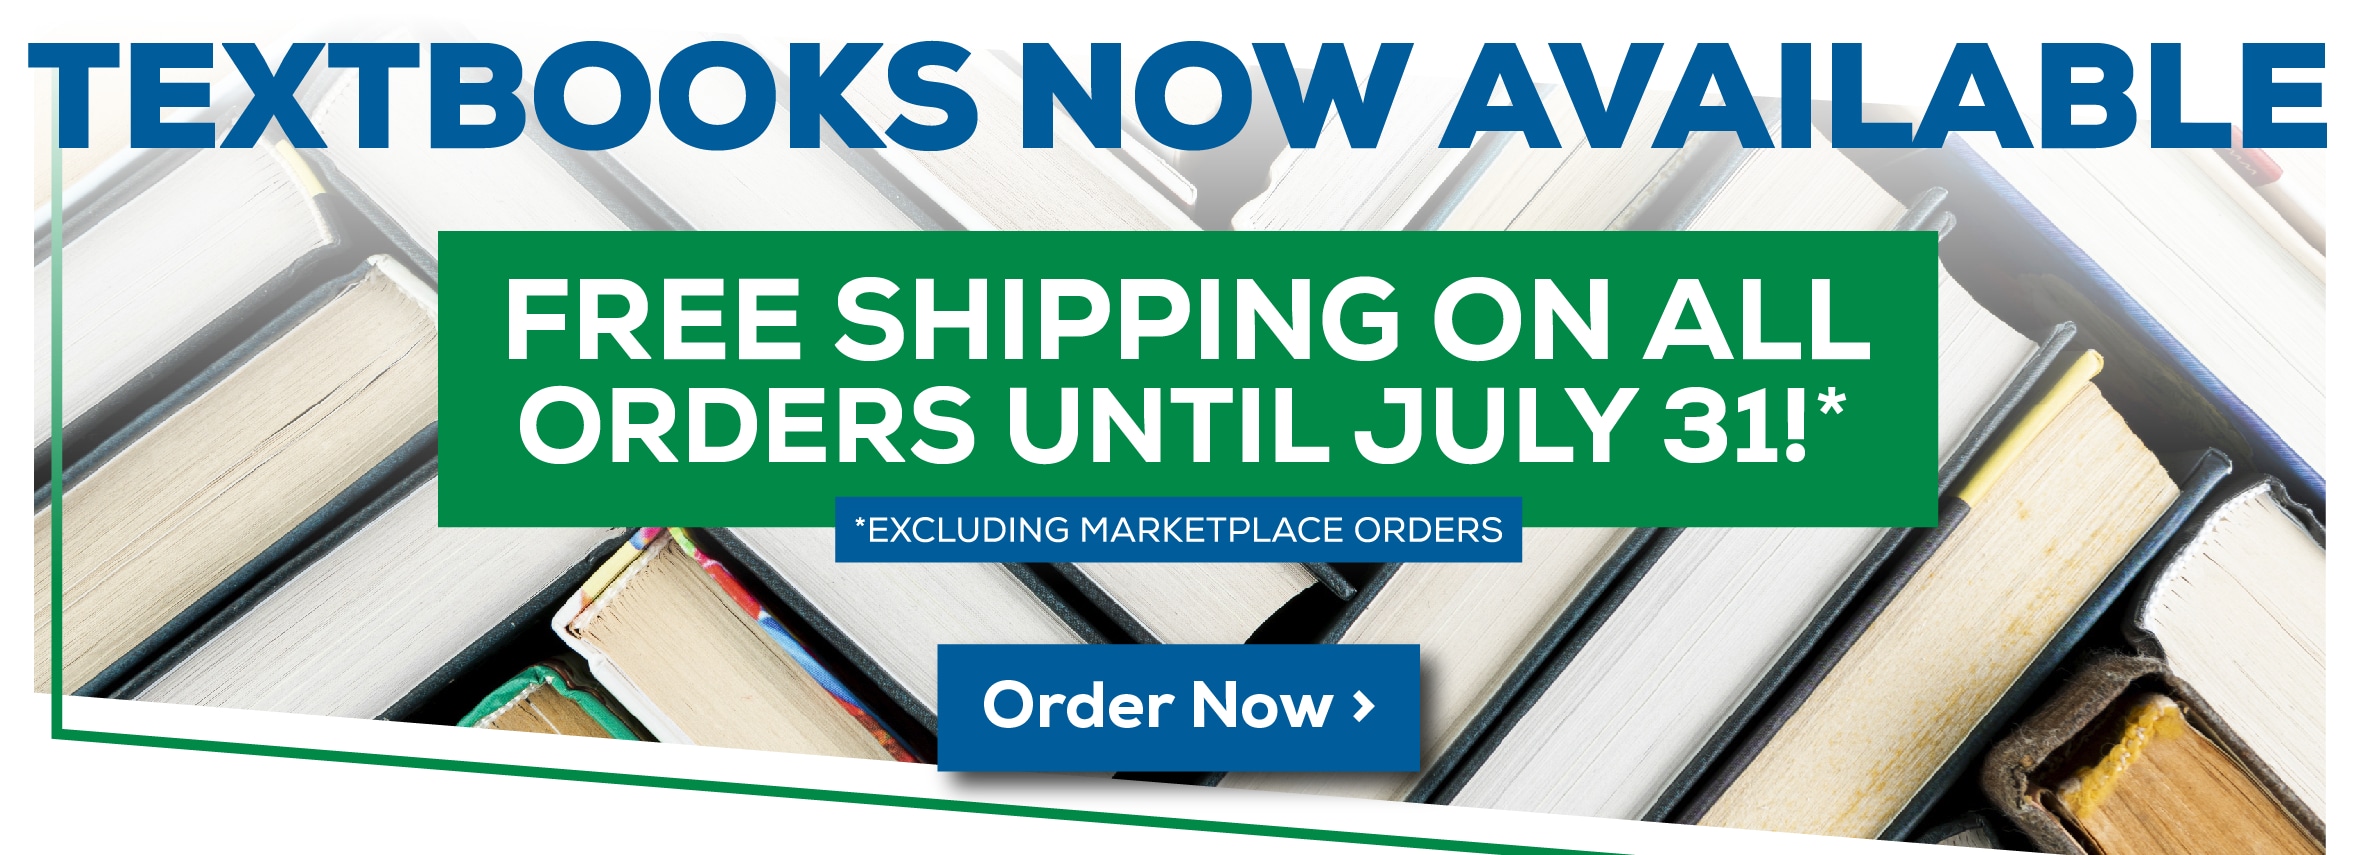 Textbooks Now Available. Free shipping on all orders until July 31. Excluding marketplace orders. Order now!